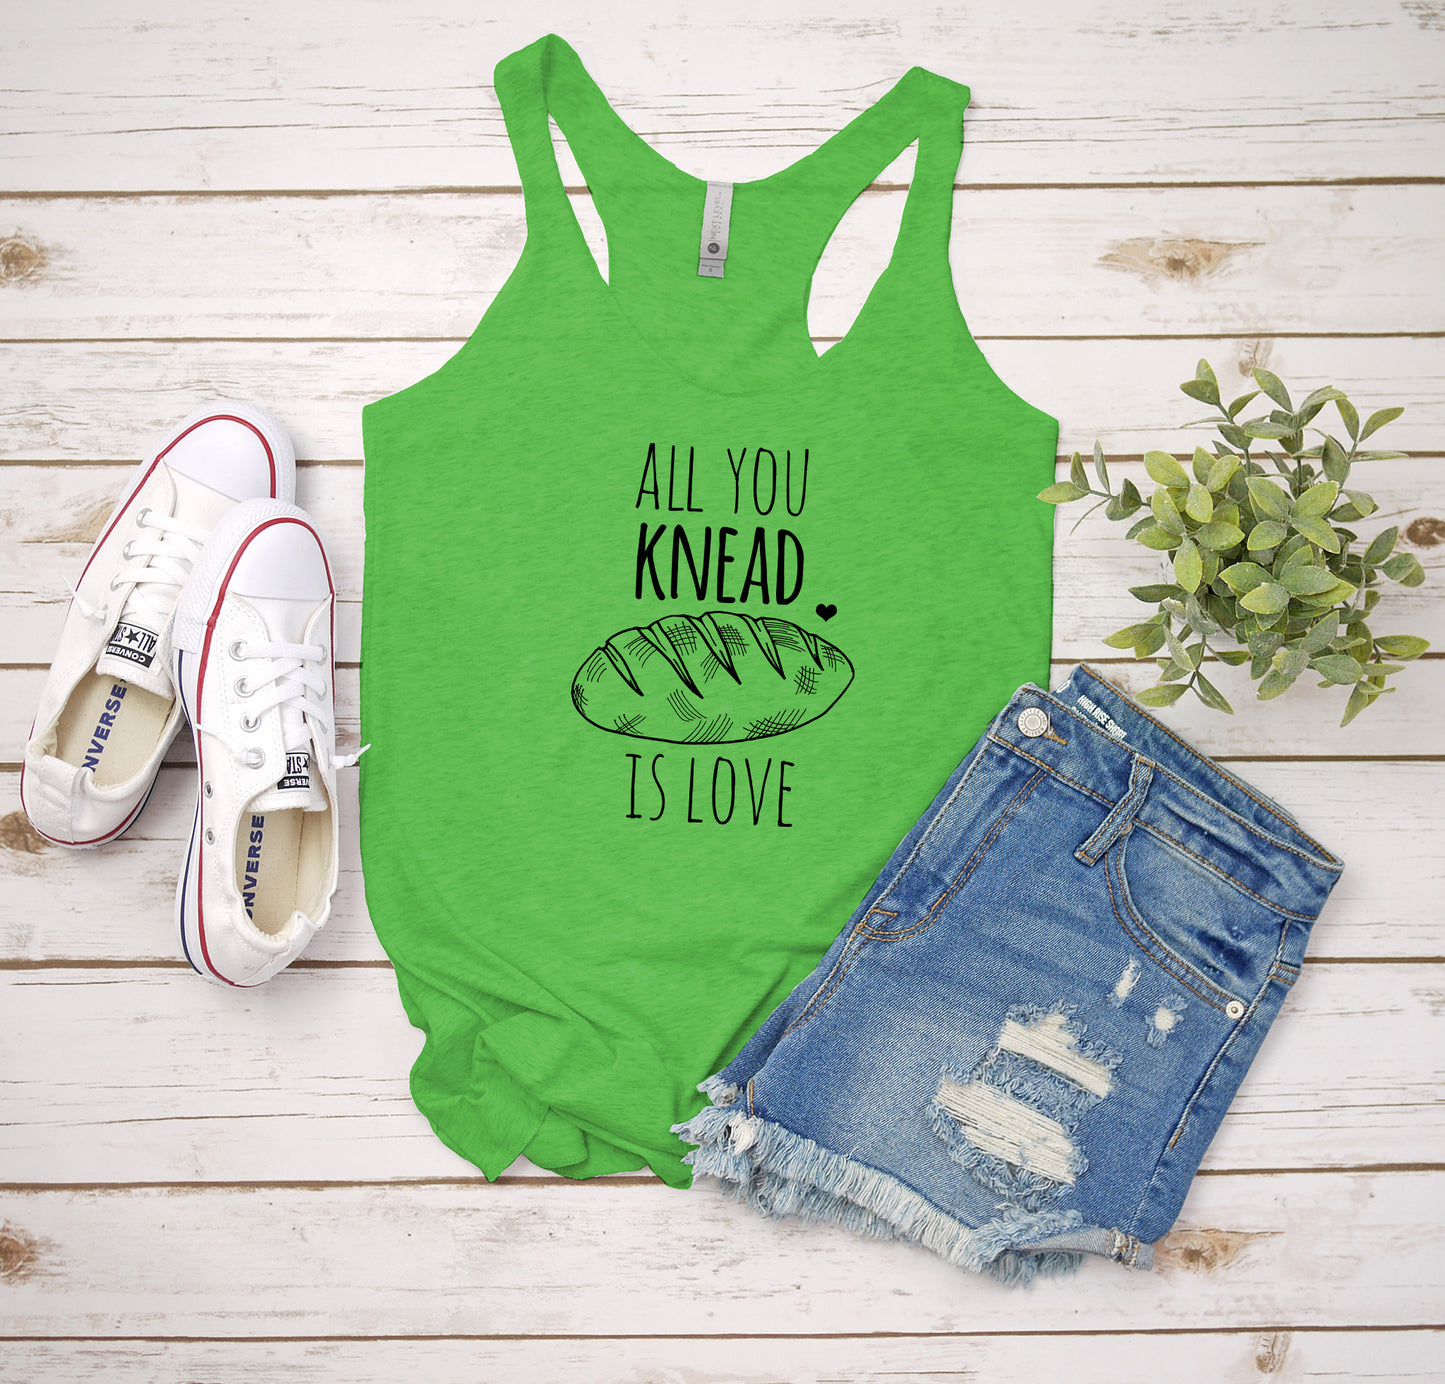 All You Knead Is Love - Women's Tank - Heather Gray, Tahiti, or Envy